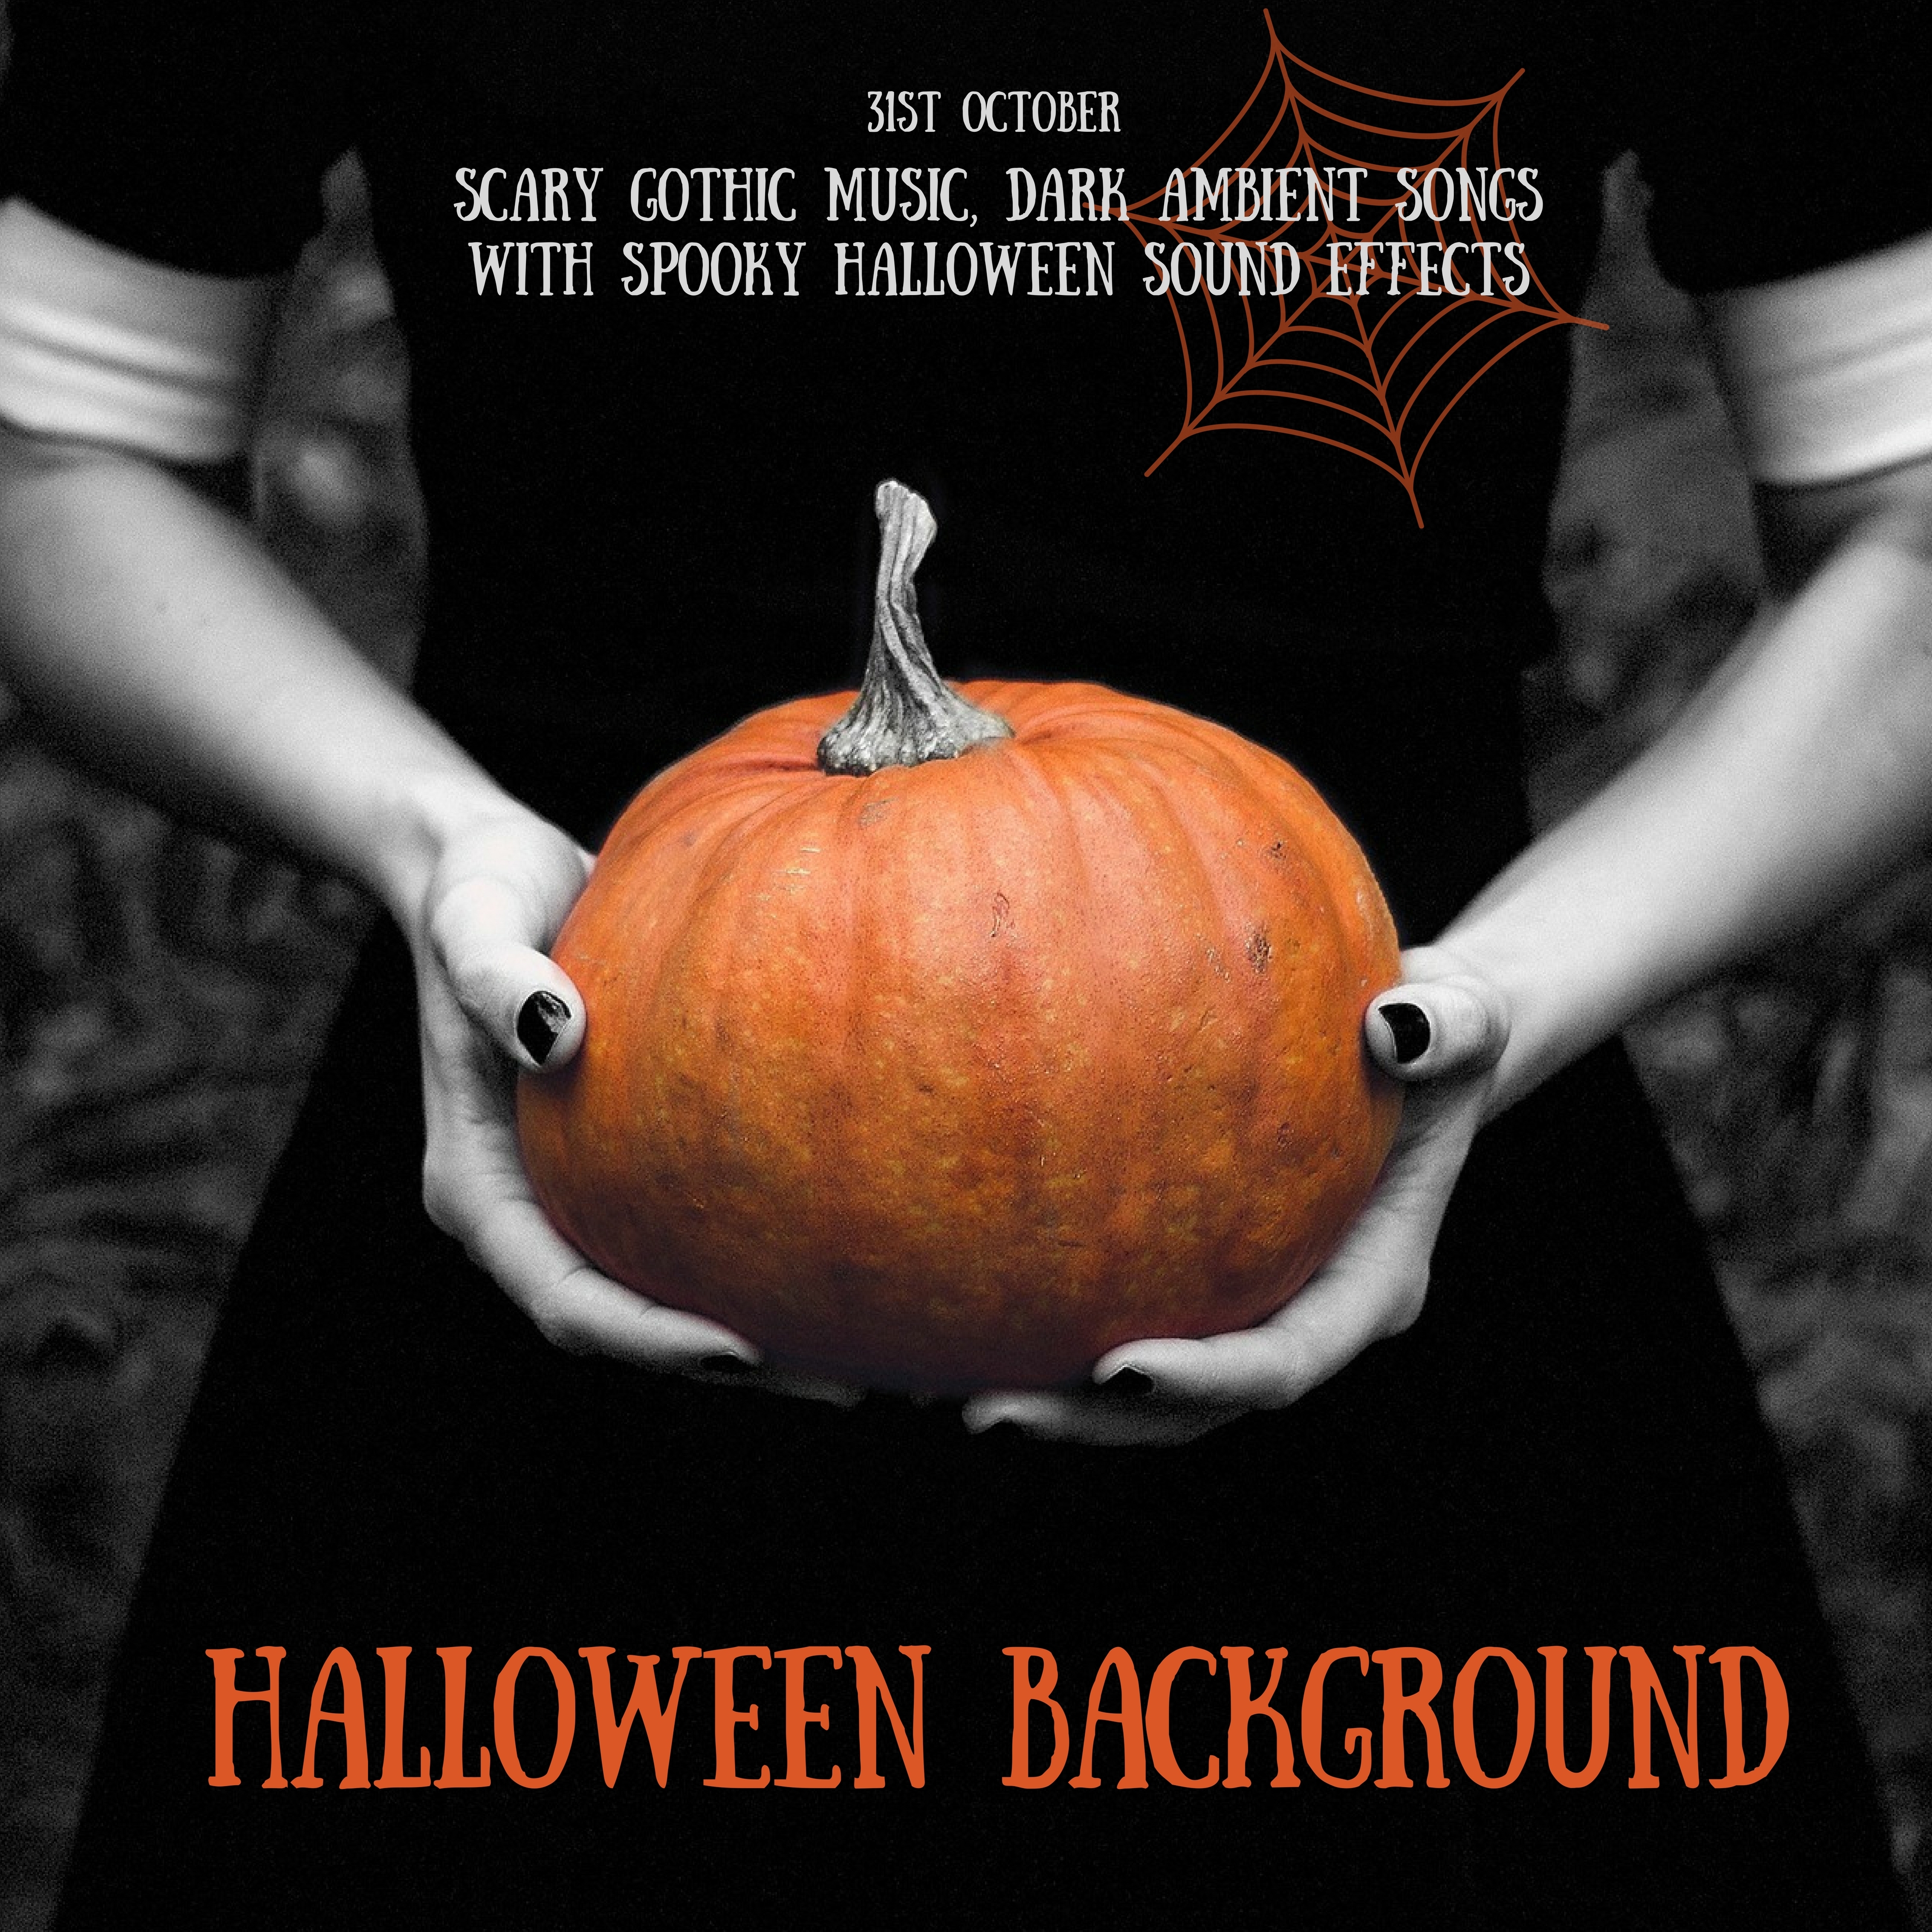 Halloween Background - Scary Gothic Music, Dark Ambient Songs with Spooky Halloween Sound Effects for a Scary Night